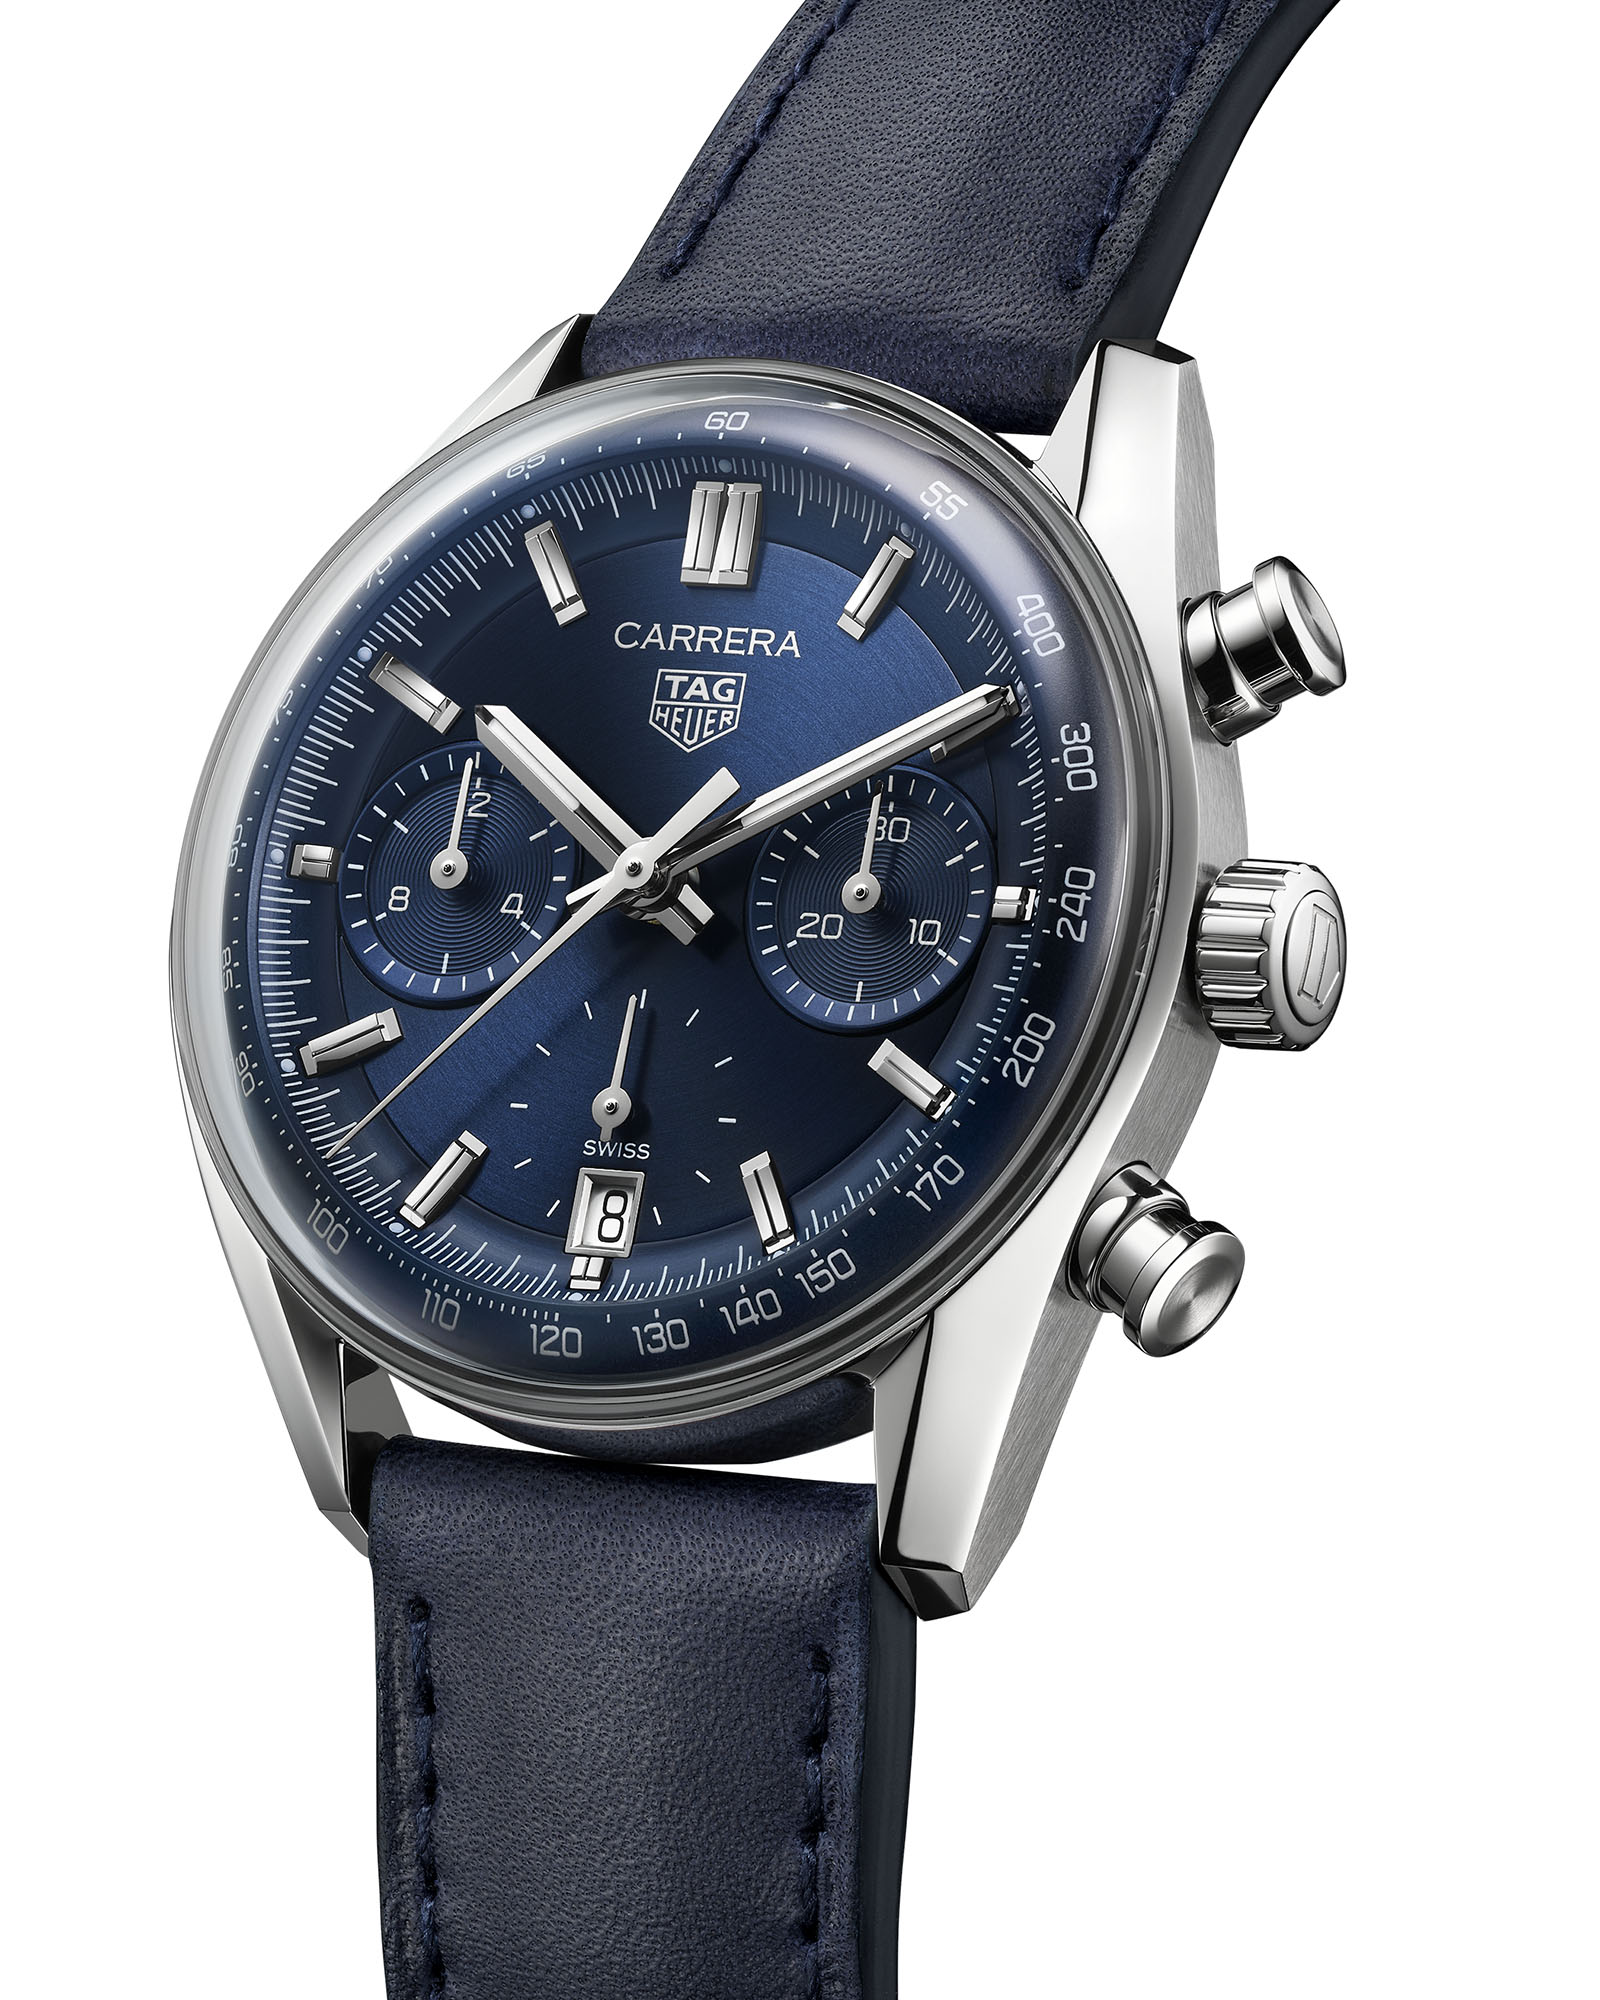 TAG Heuer Carrera Chronograph With New ‘Glassbox’ Case Design